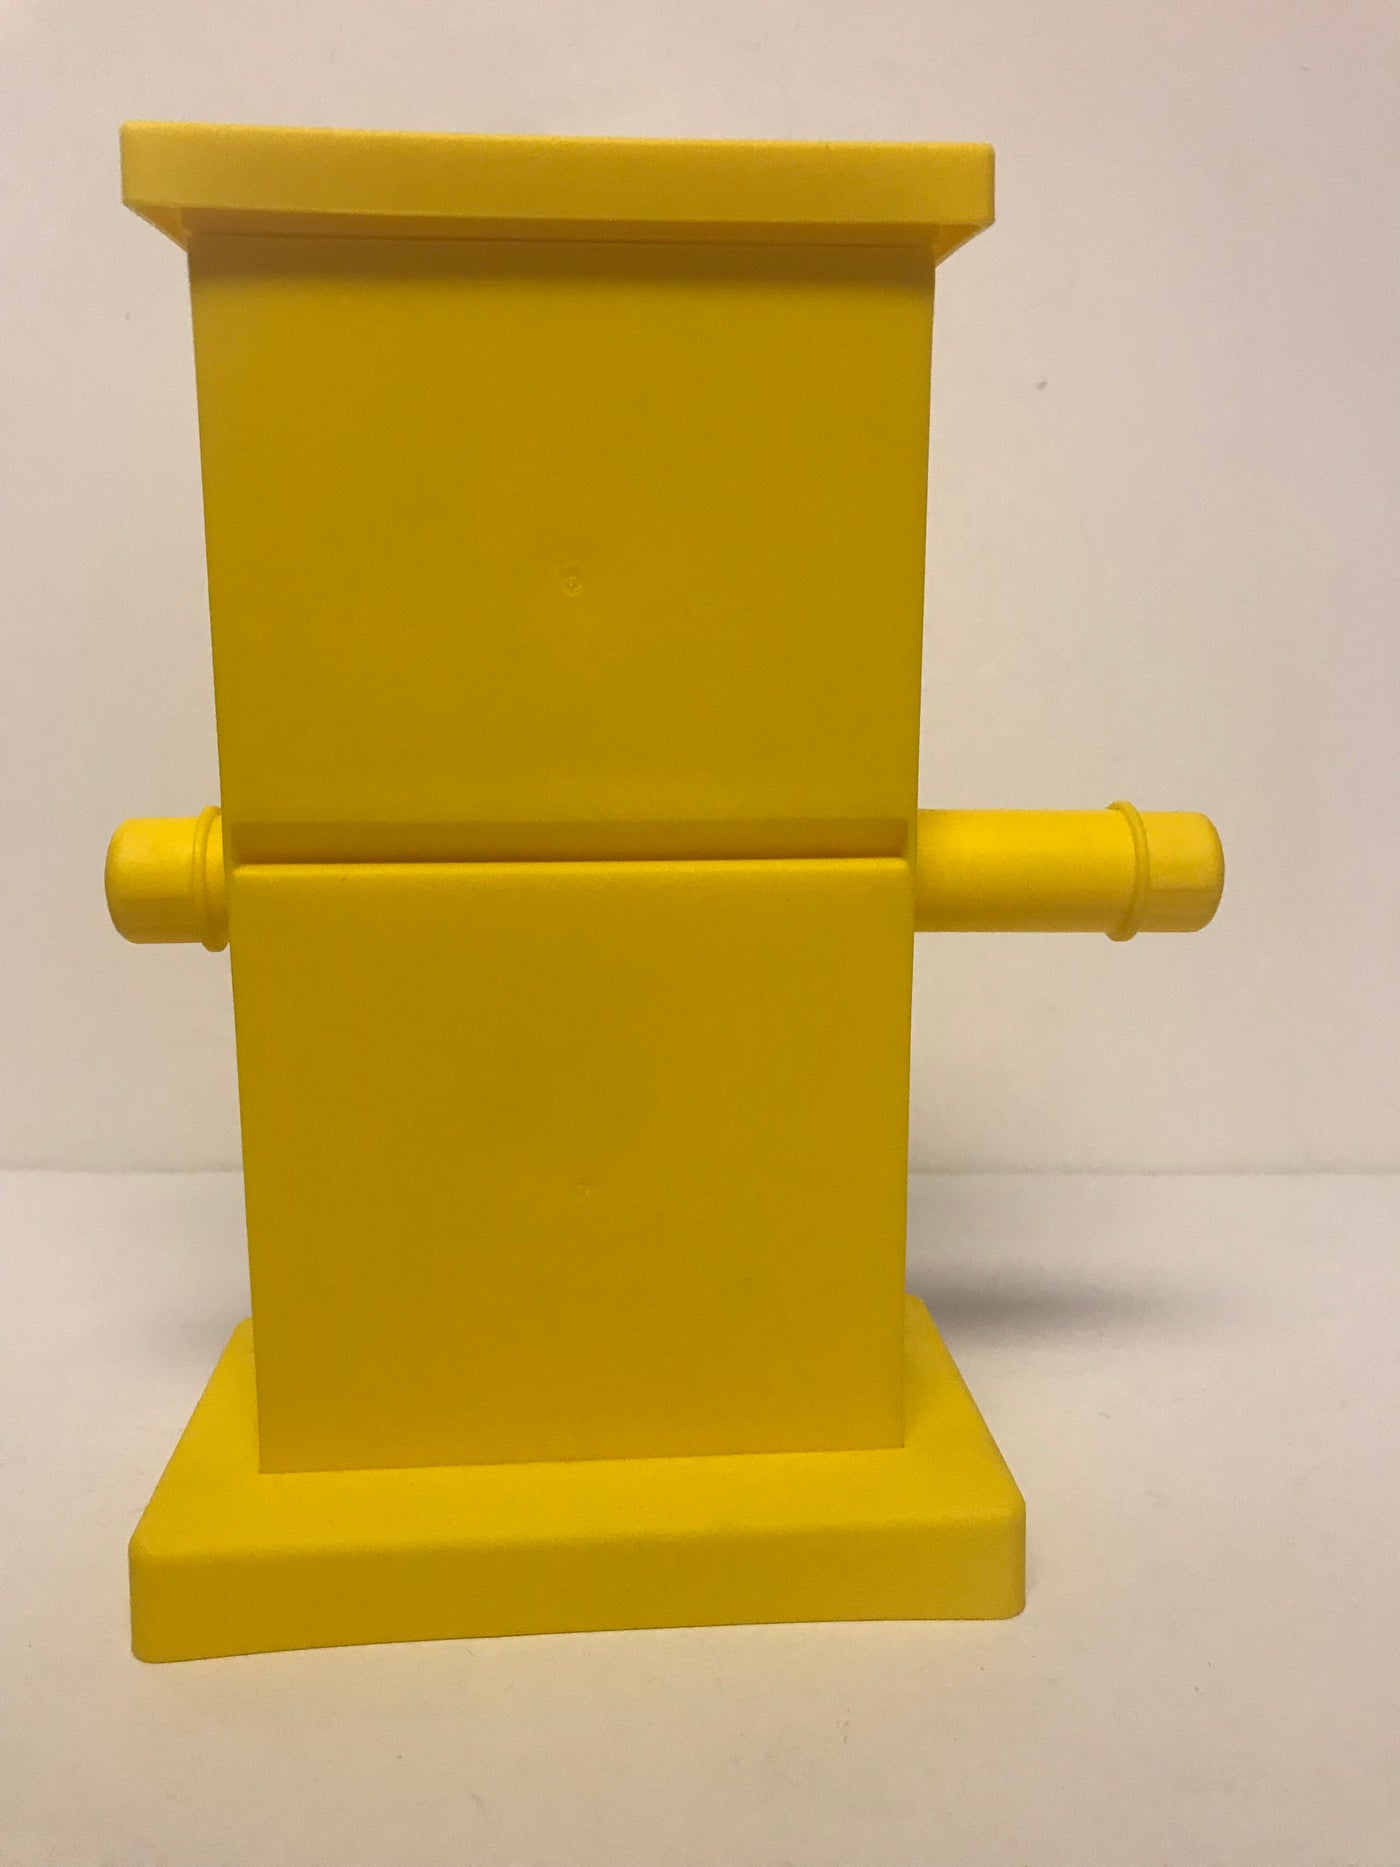 M&M's World Zig Zag Yellow Candy Dispenser New with Tags